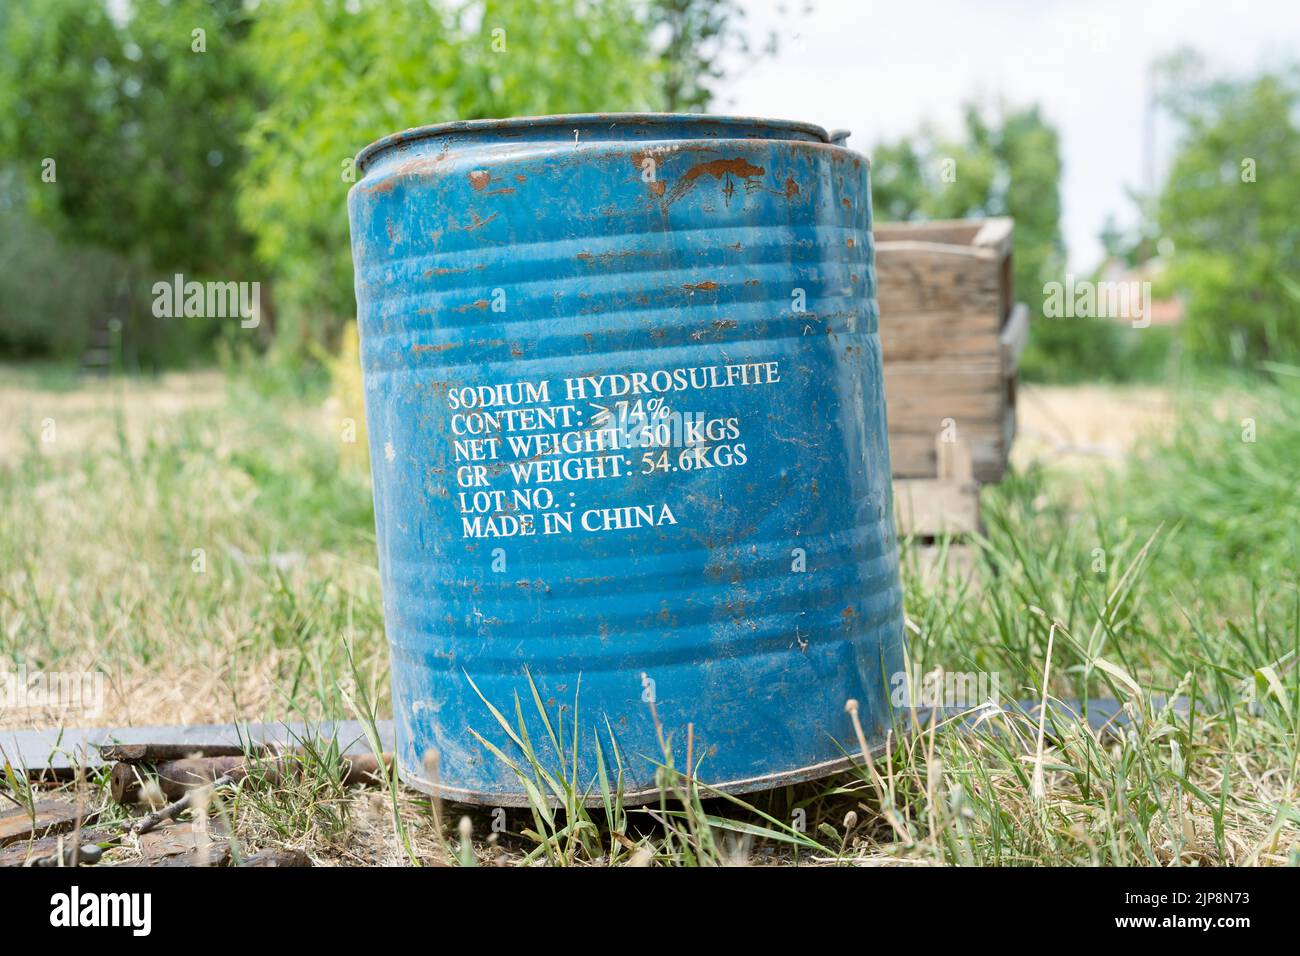 Sodium hydrosulfide, chemical solution barrel, garden view at the background. Stock Photo